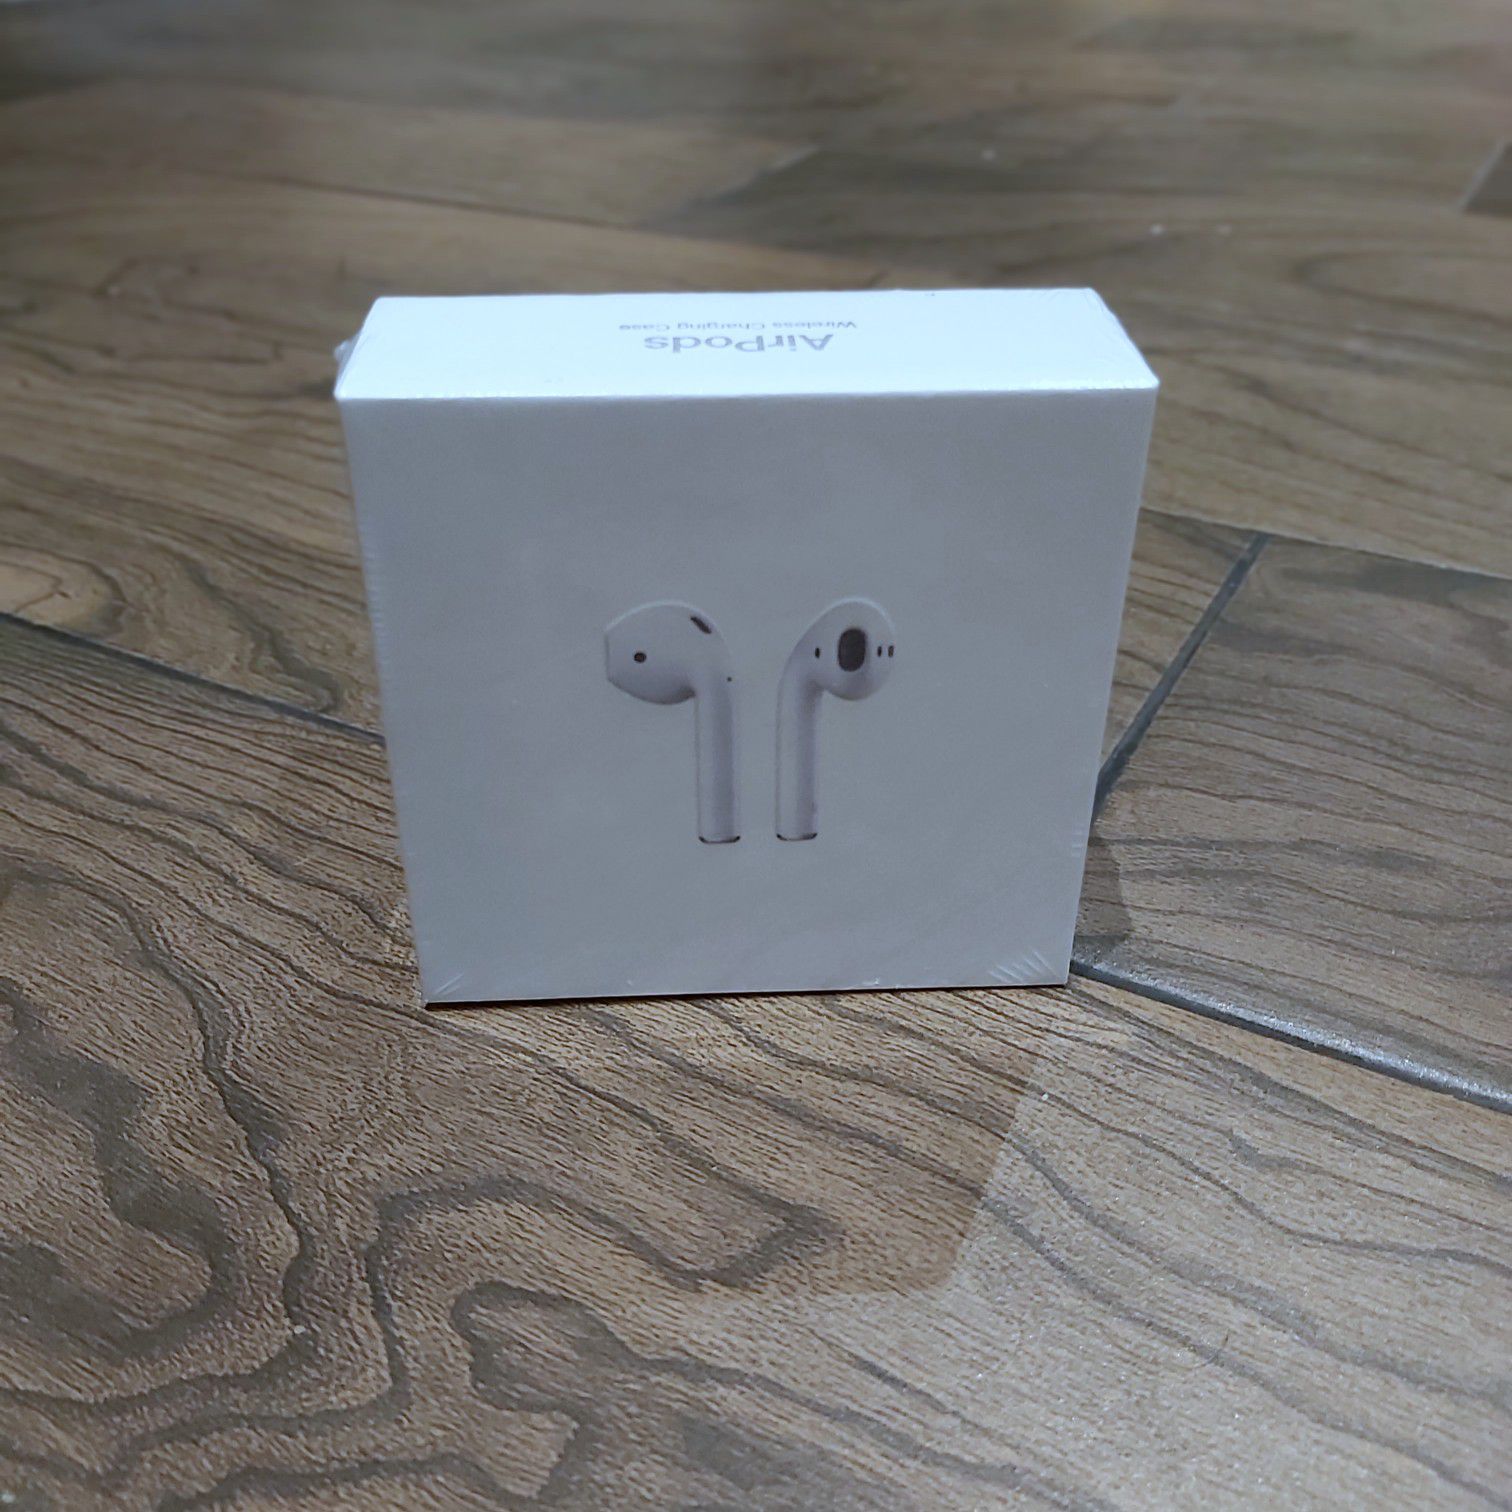 New Airpods 2nd Generation